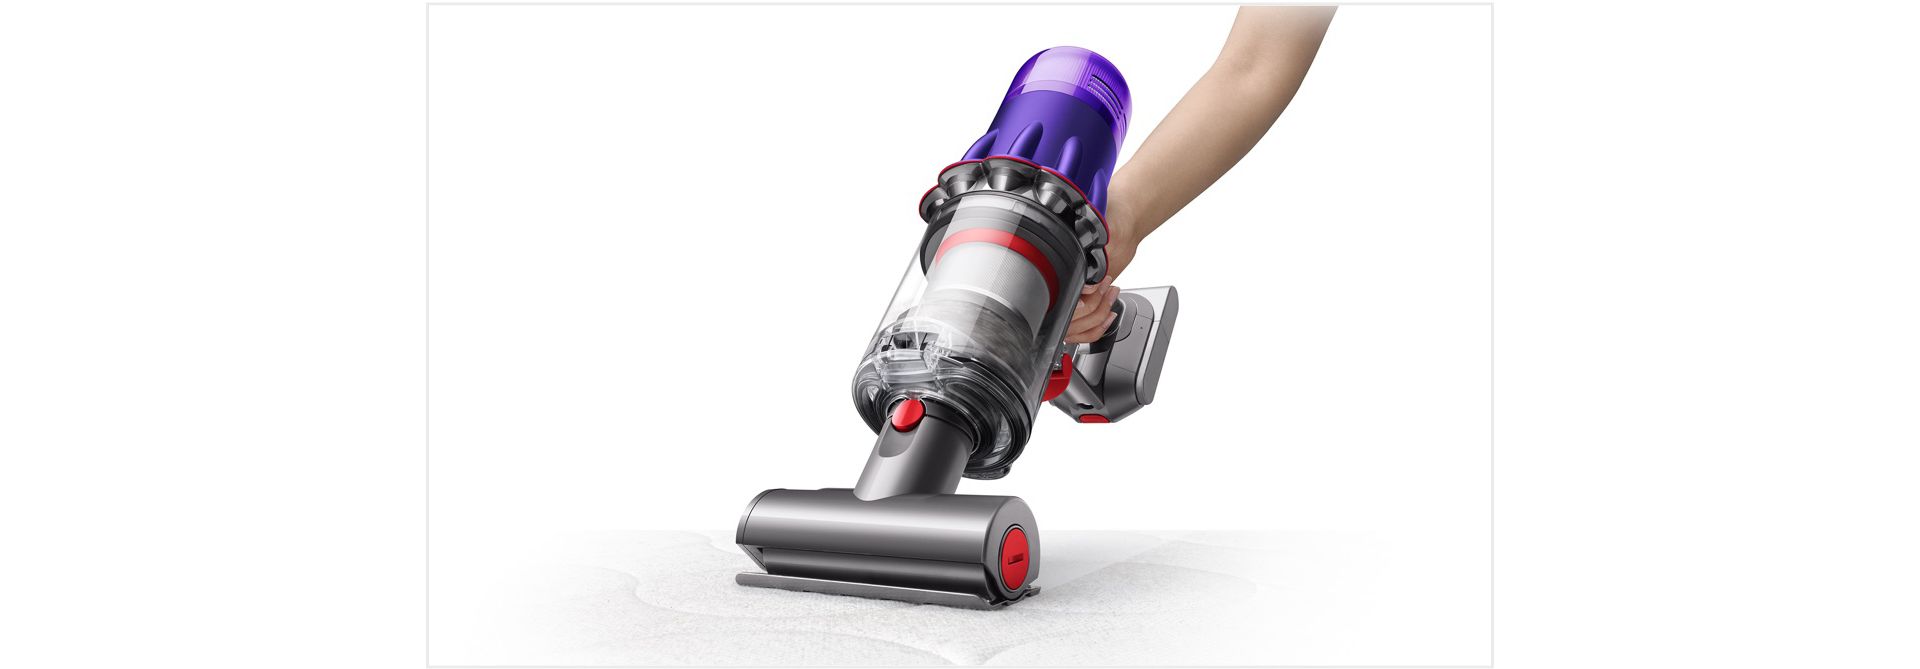 dyson dc43h mattress handheld vacuum cleaner review